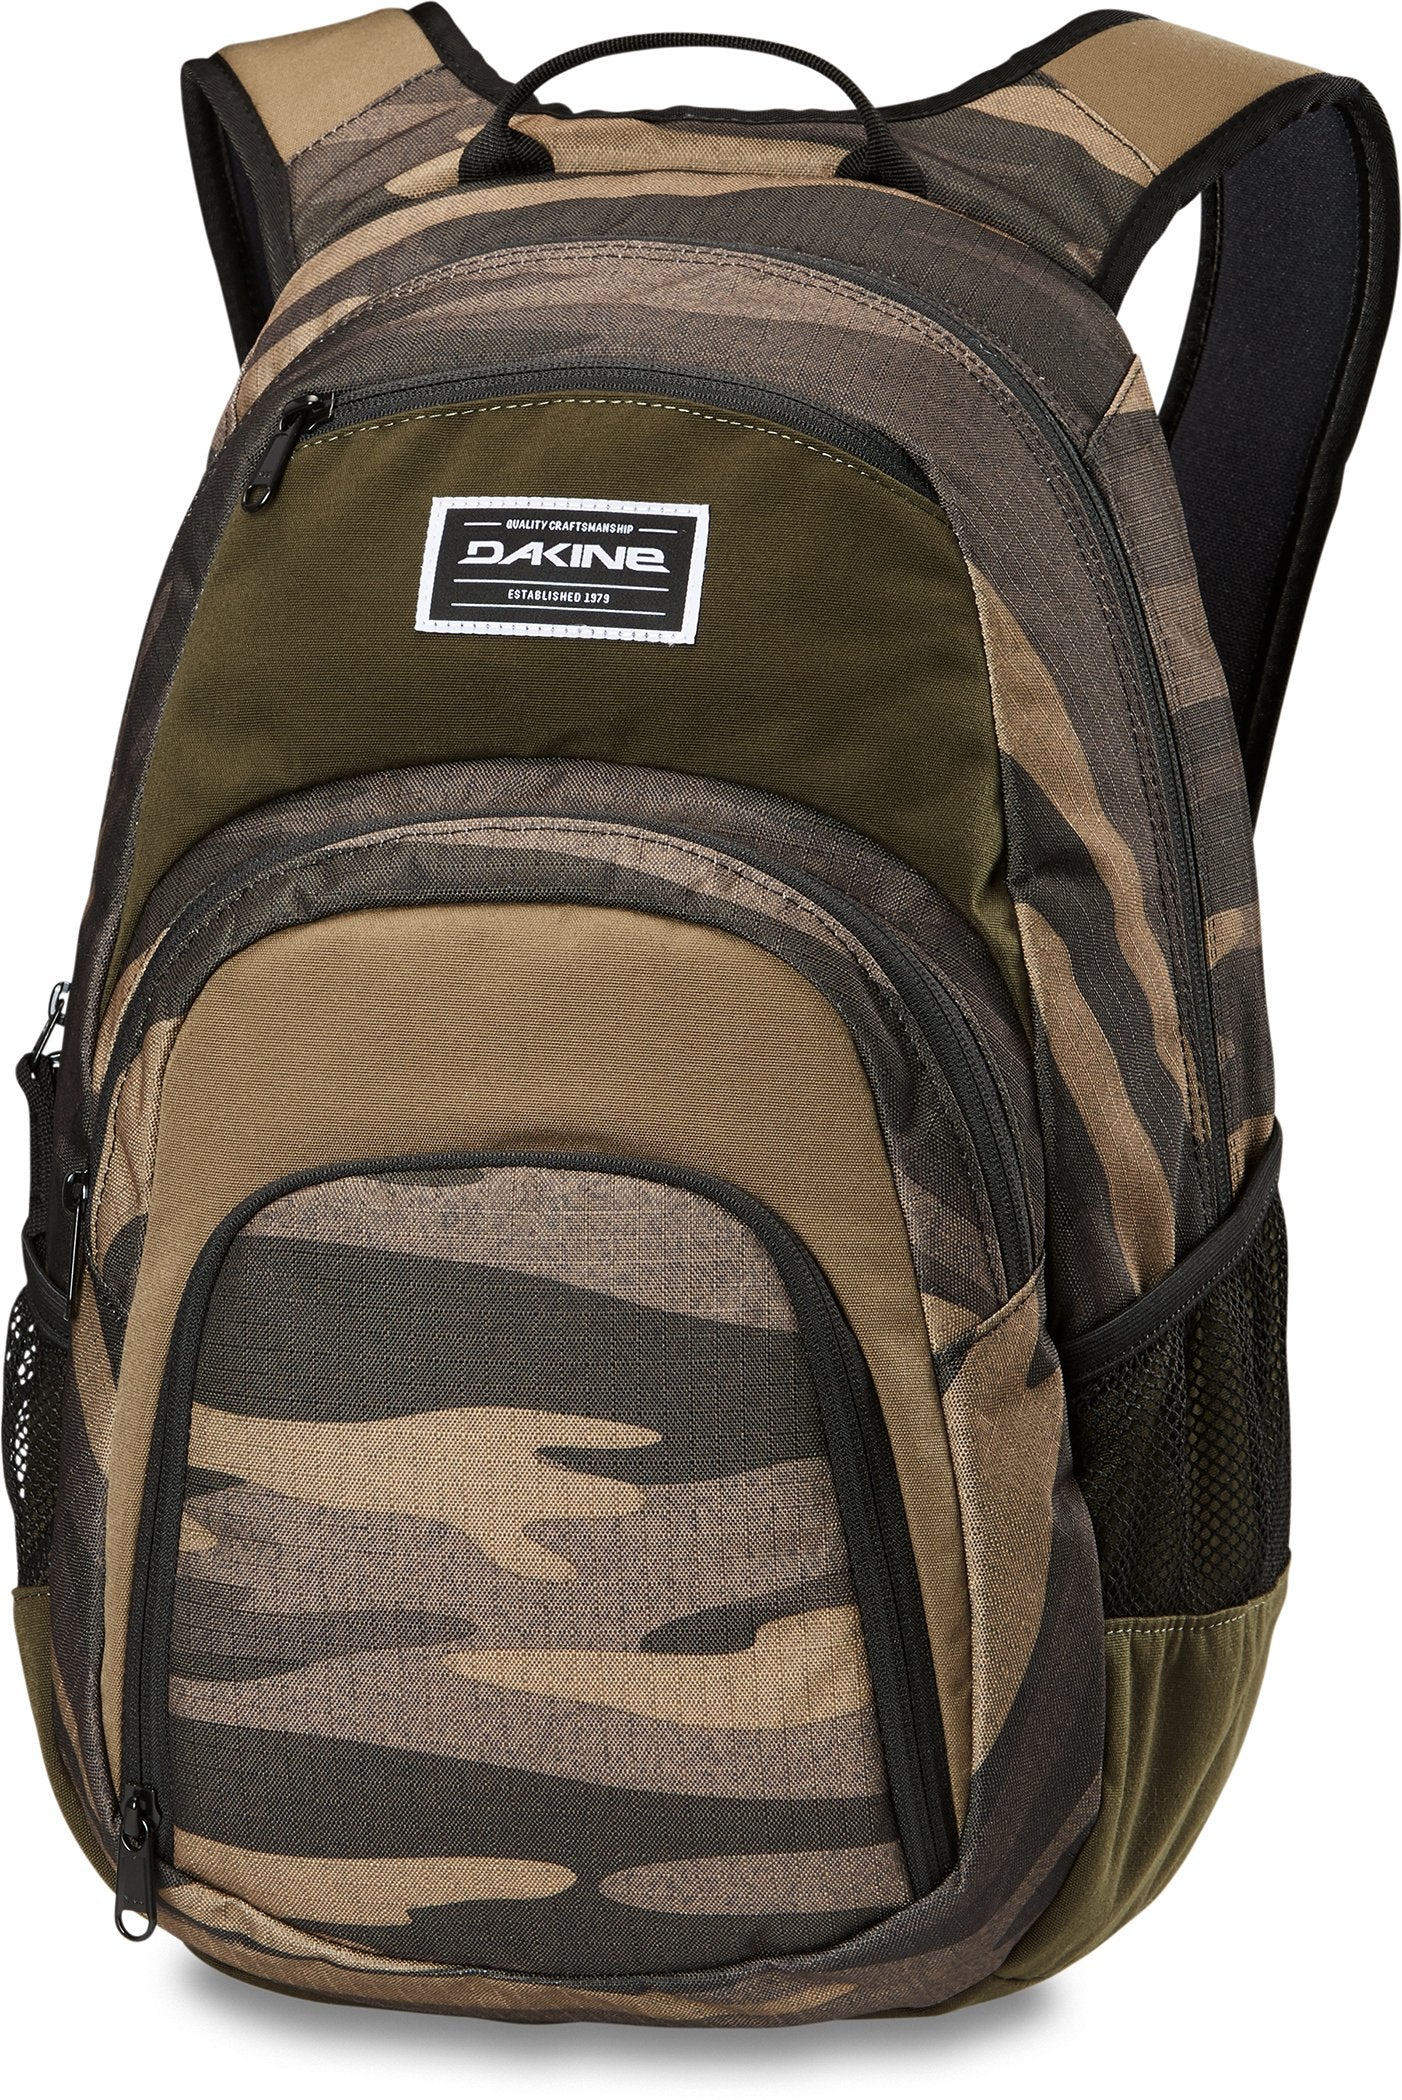 Campus 25L Backpack, One Size, Camo backpacks4less.com